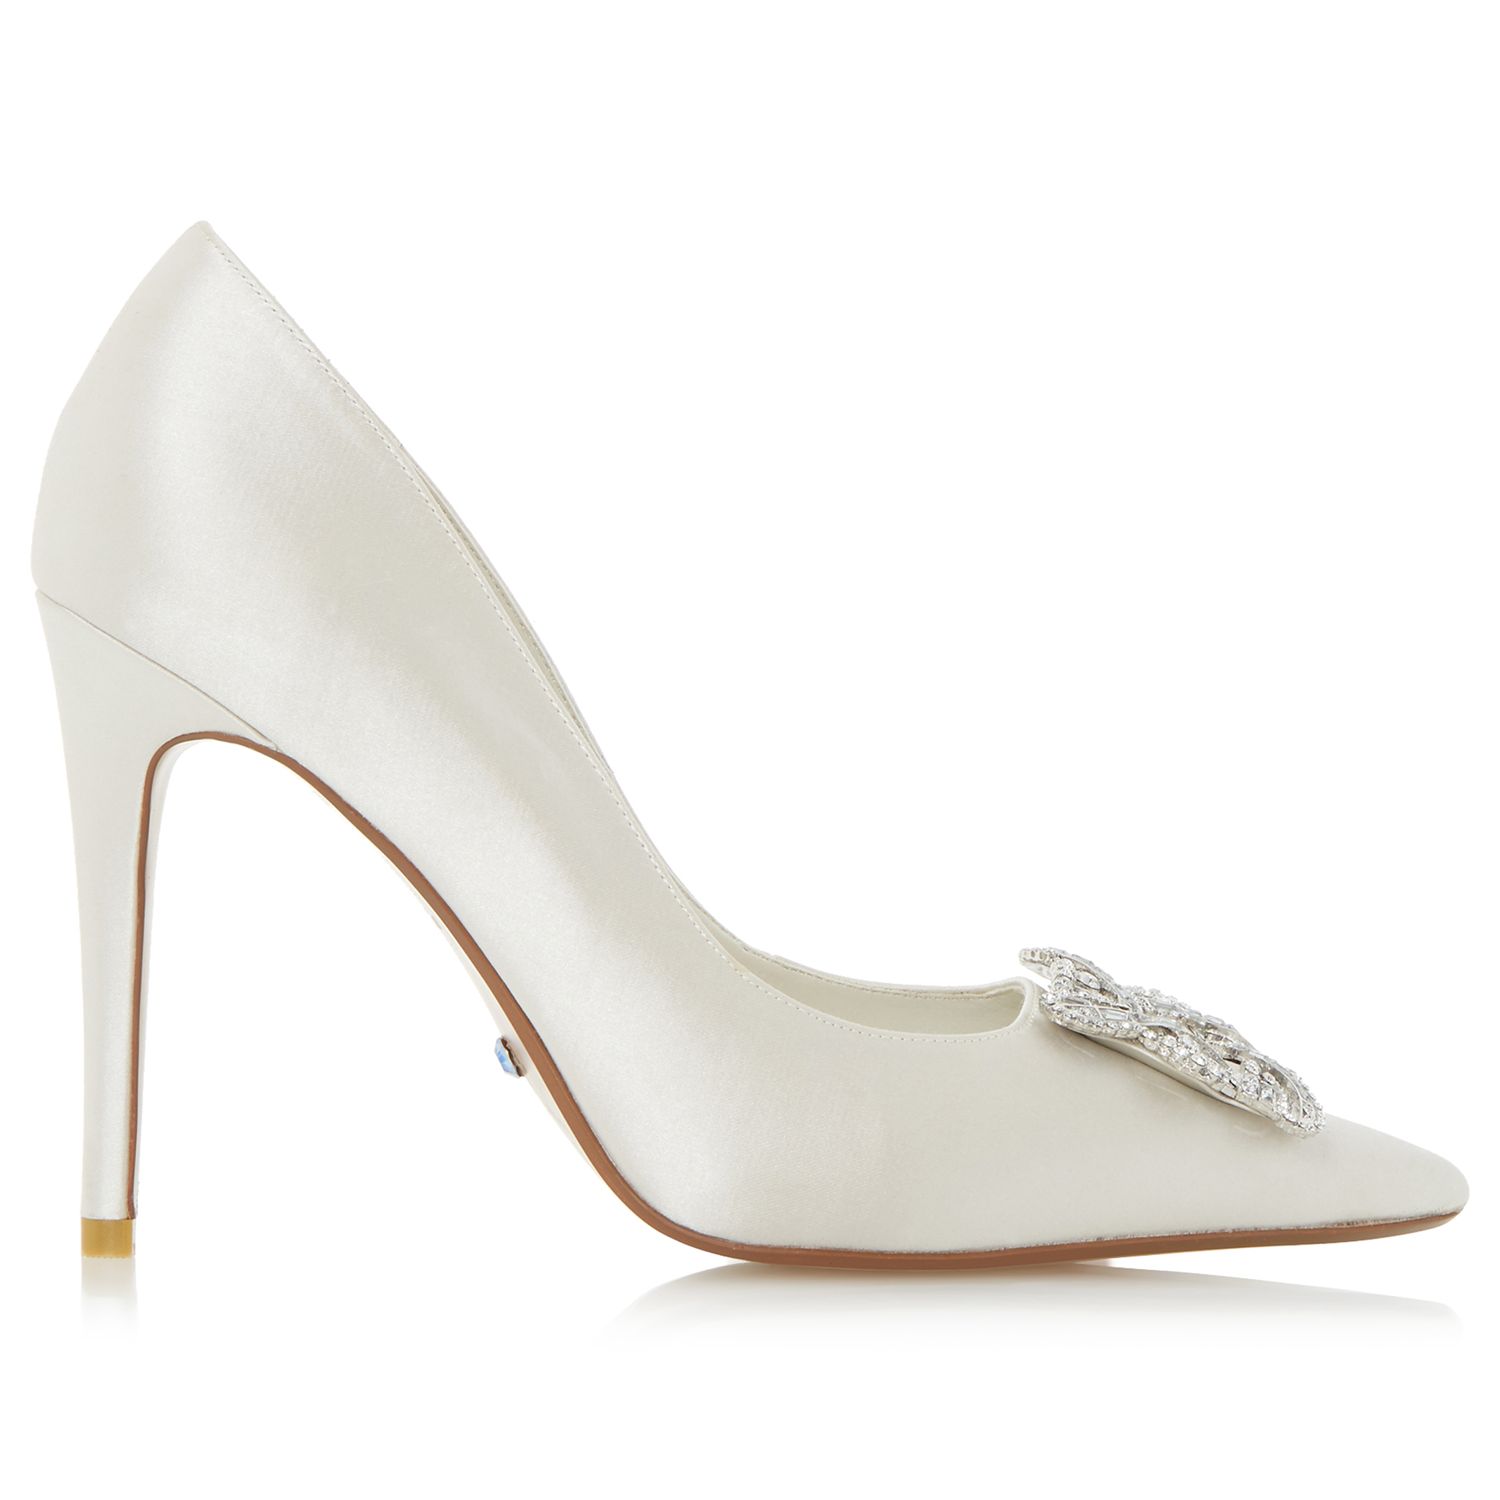 Dune Bridal Collection Breanna Jewel Stiletto Court Shoes, Ivory Satin